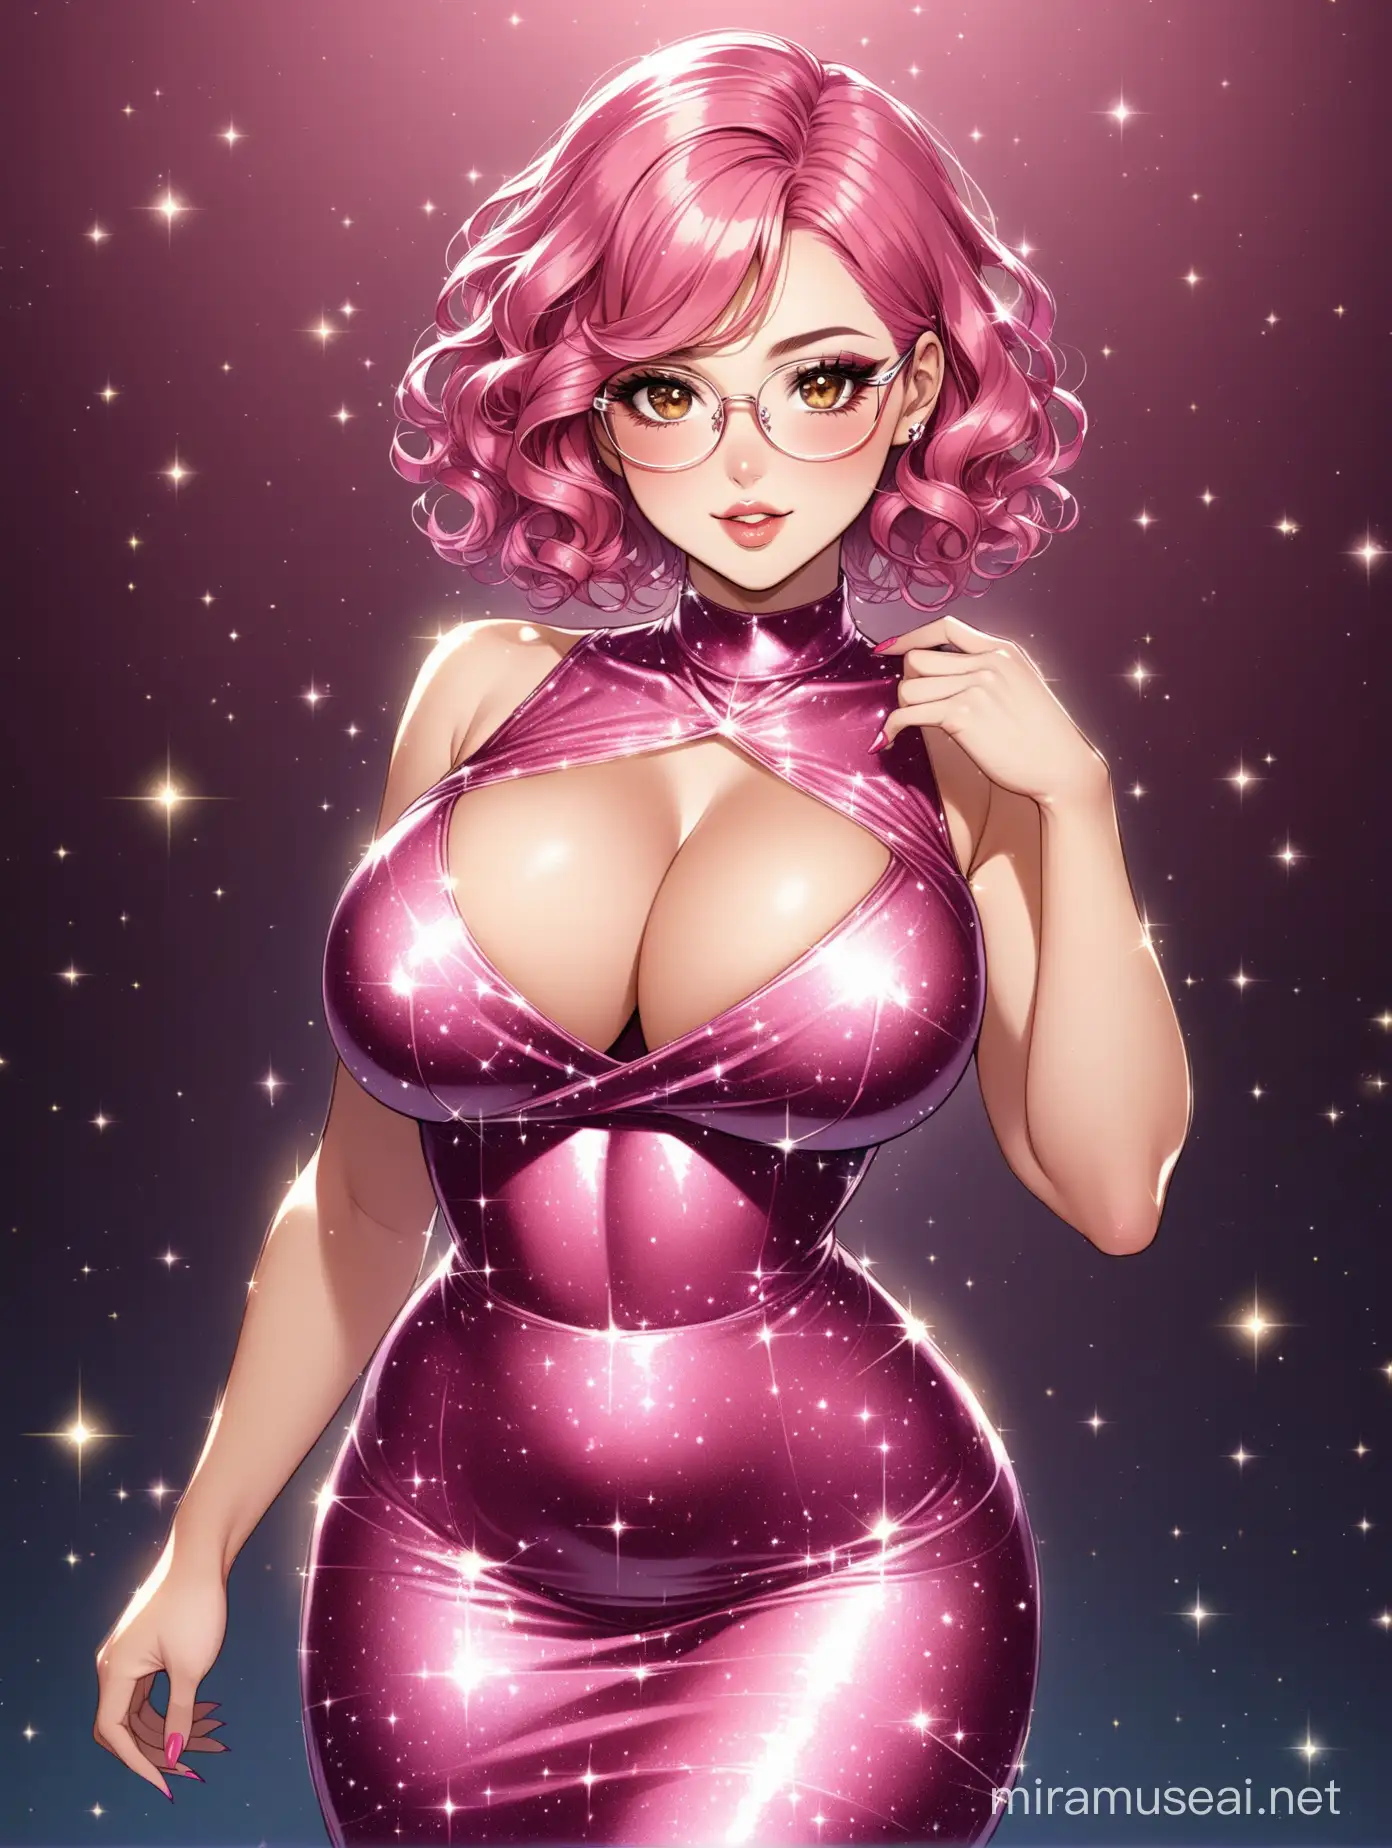 Elegant Woman with Short Curly Pink Hair and Sparkly Dress